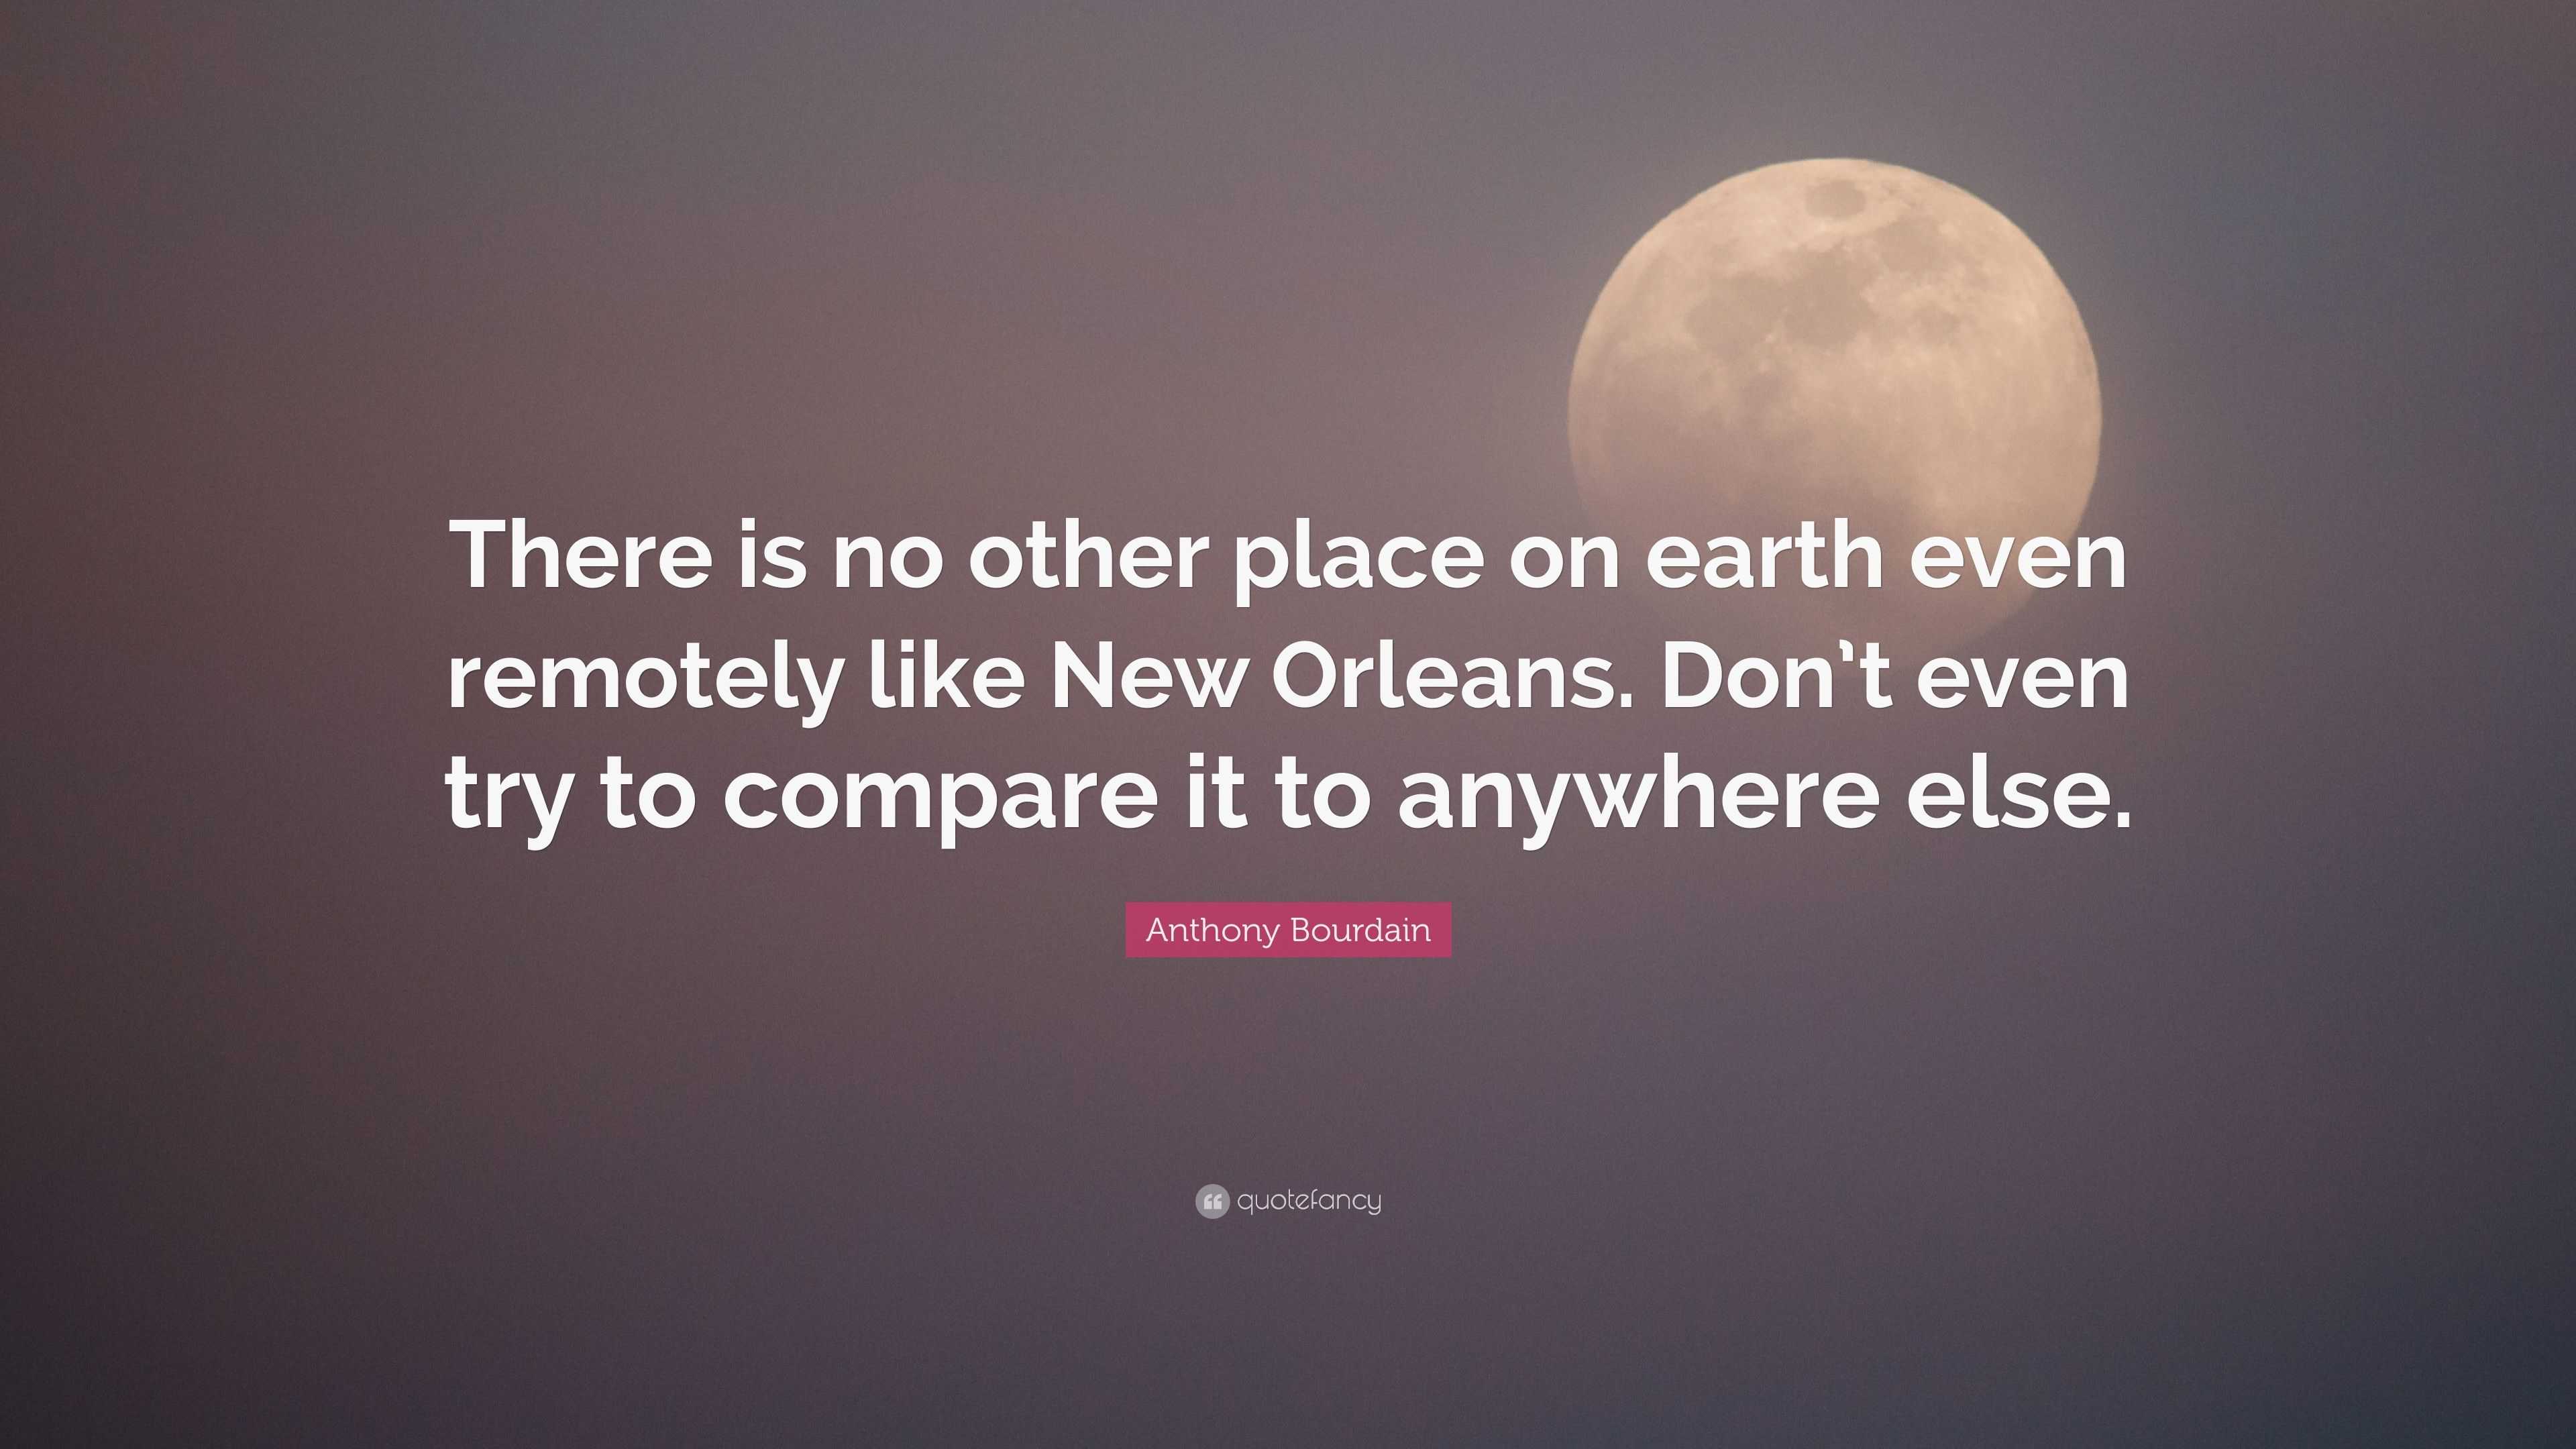 Anthony Bourdain Quote: “There is no other place on earth even remotely